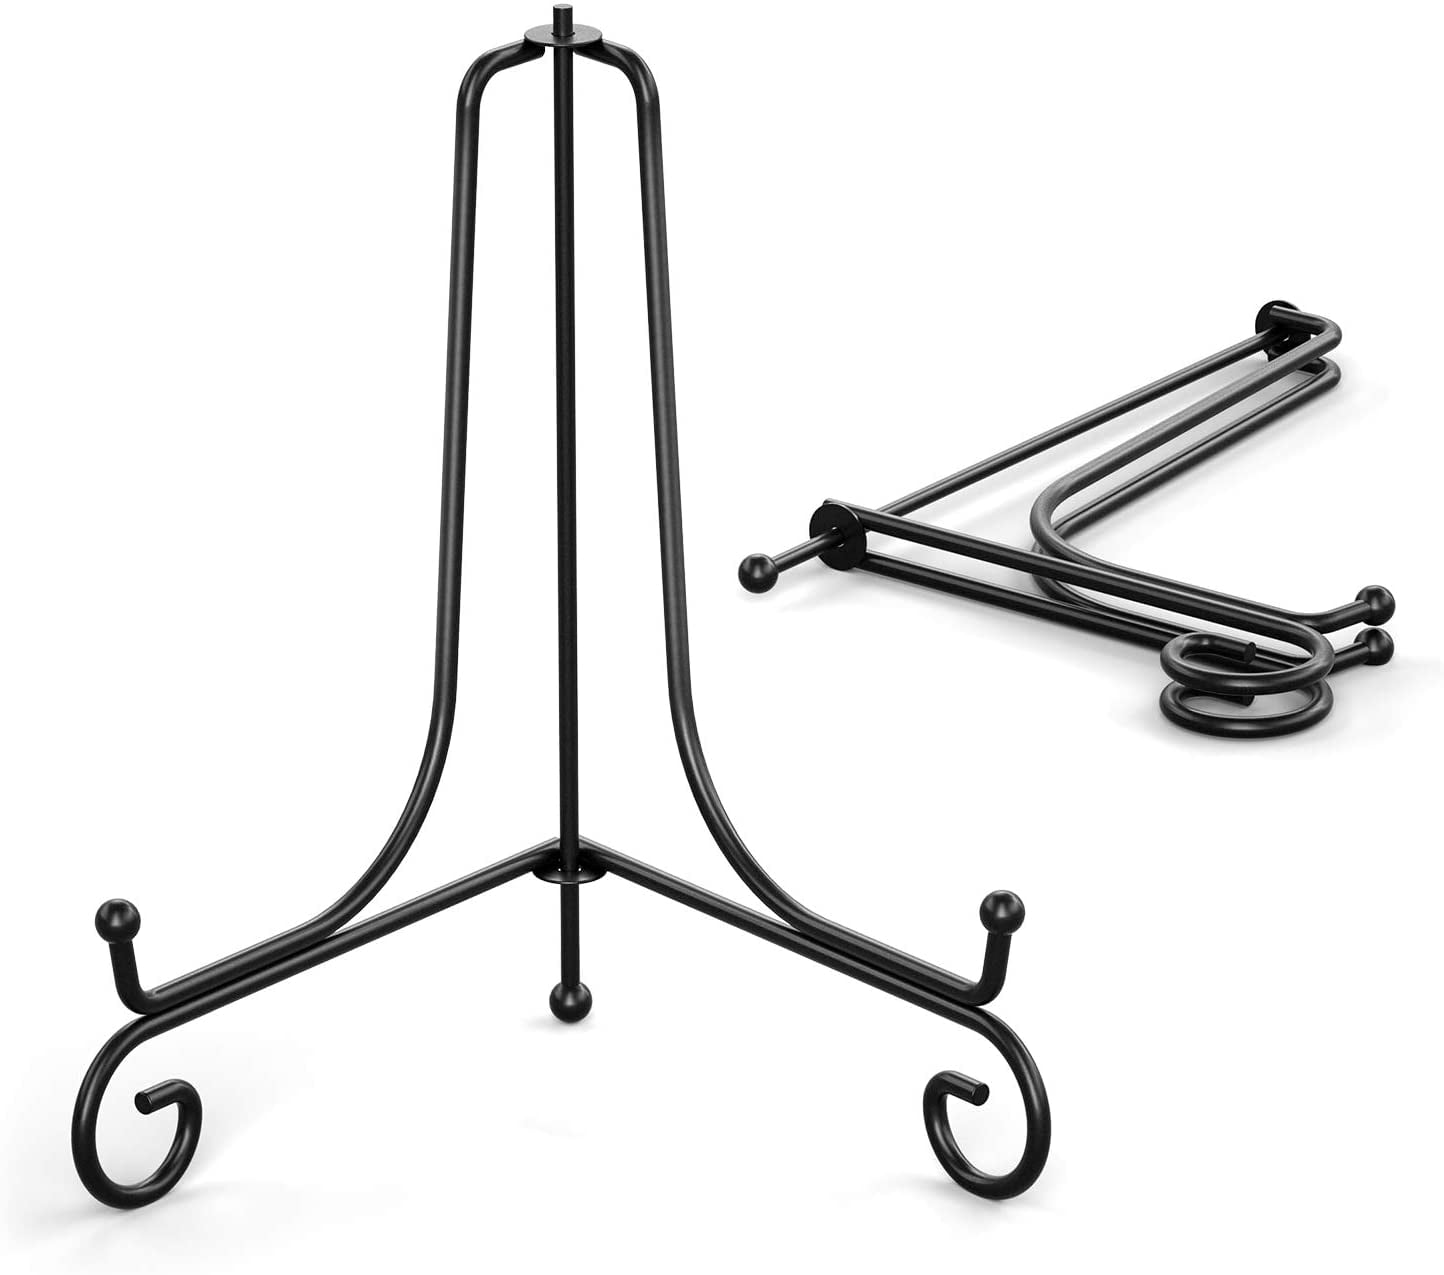  Operitacx Display Iron Stand Anti Plate Stands Tablet Mount  Easels for Display Easel Plate Wire Plate Stand Plate Holder Display Stand  Iron Plate Stand Metal Frame Holder Books Picture Frame 